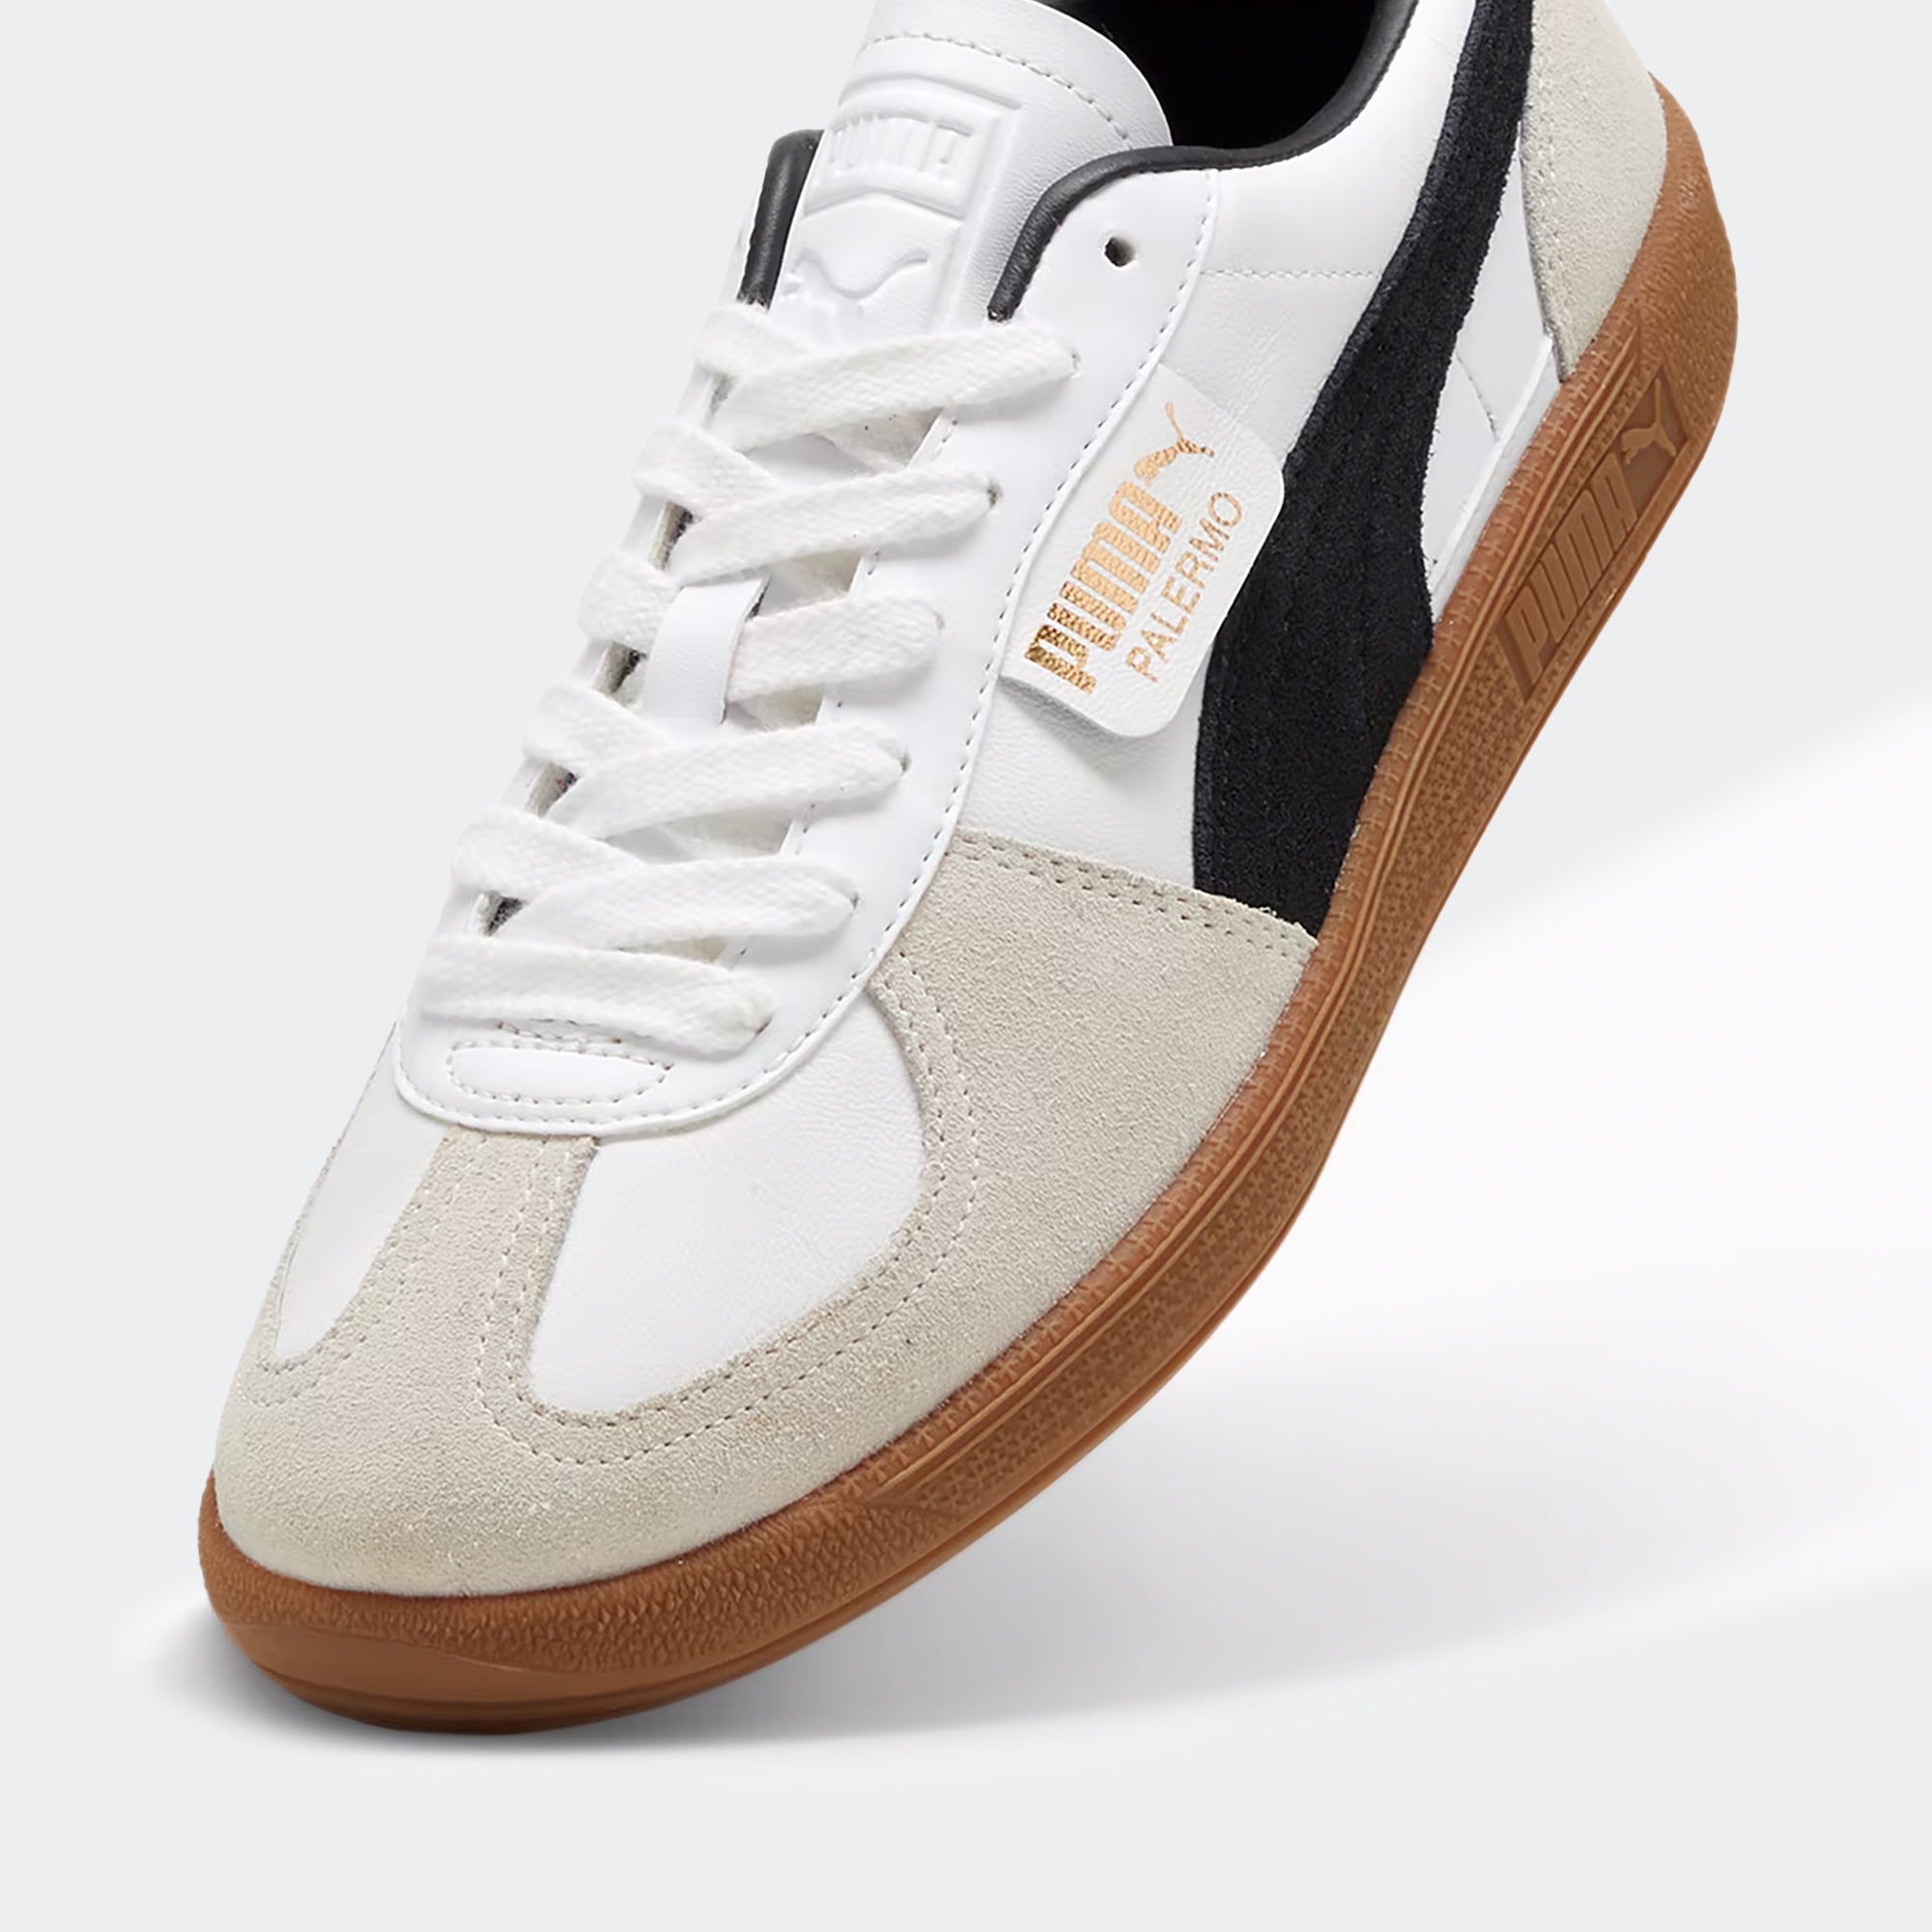 PUMA Palermo Leather sneakers in black and white